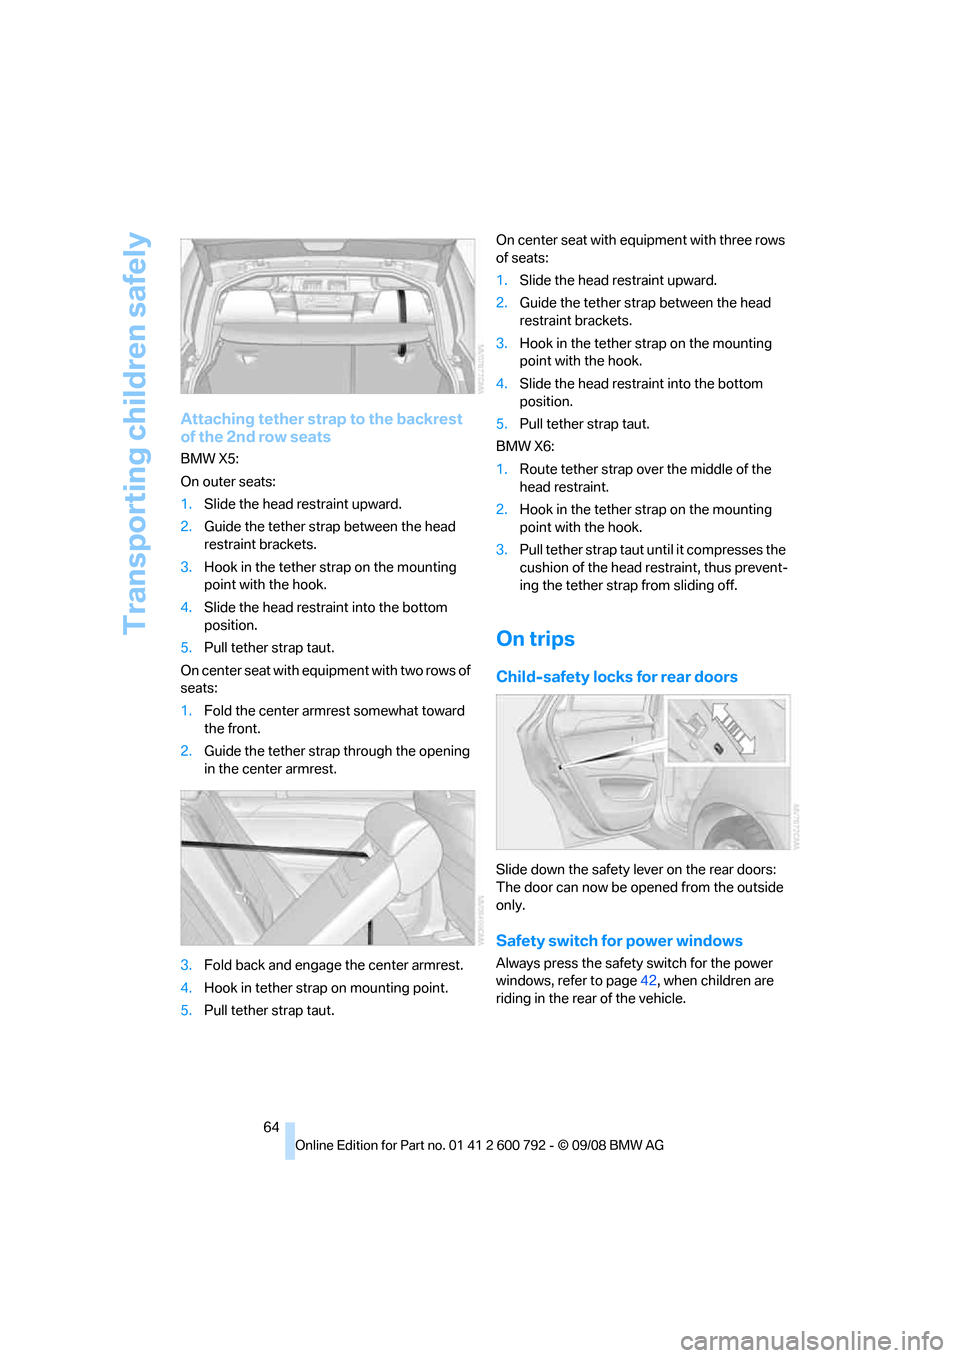 BMW X5 2009 E70 User Guide Transporting children safely
64
Attaching tether strap to the backrest 
of the 2nd row seats
BMW X5:
On outer seats:
1.Slide the head re straint upward.
2. Guide the tether stra p between the head 
re